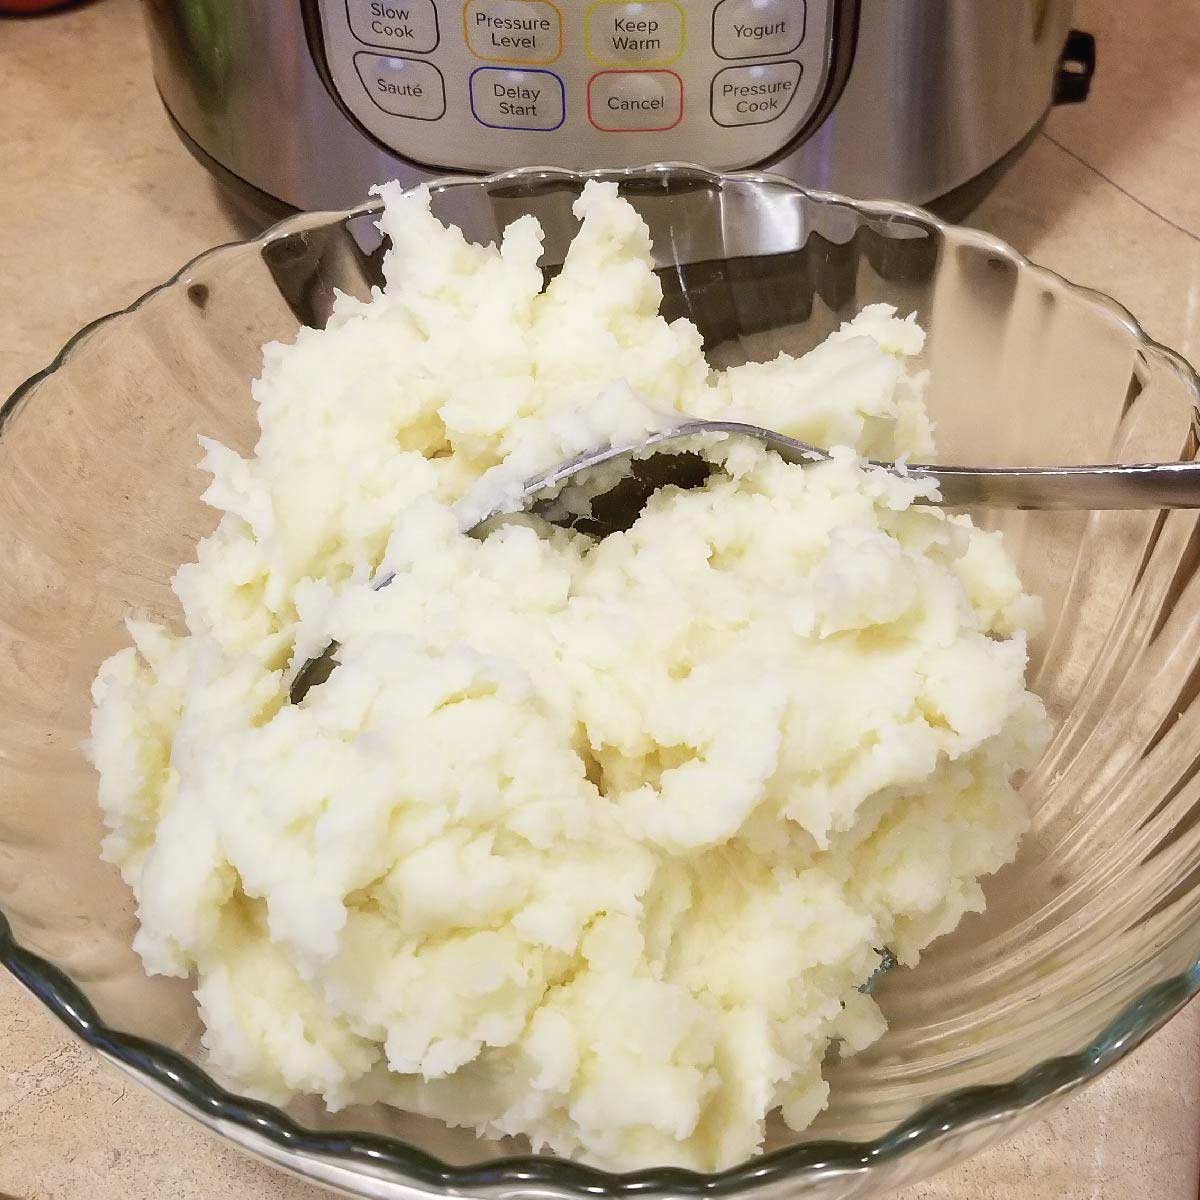 Plain mashed potatoes in a serving bowl very close up with the Instant Pot in the background.